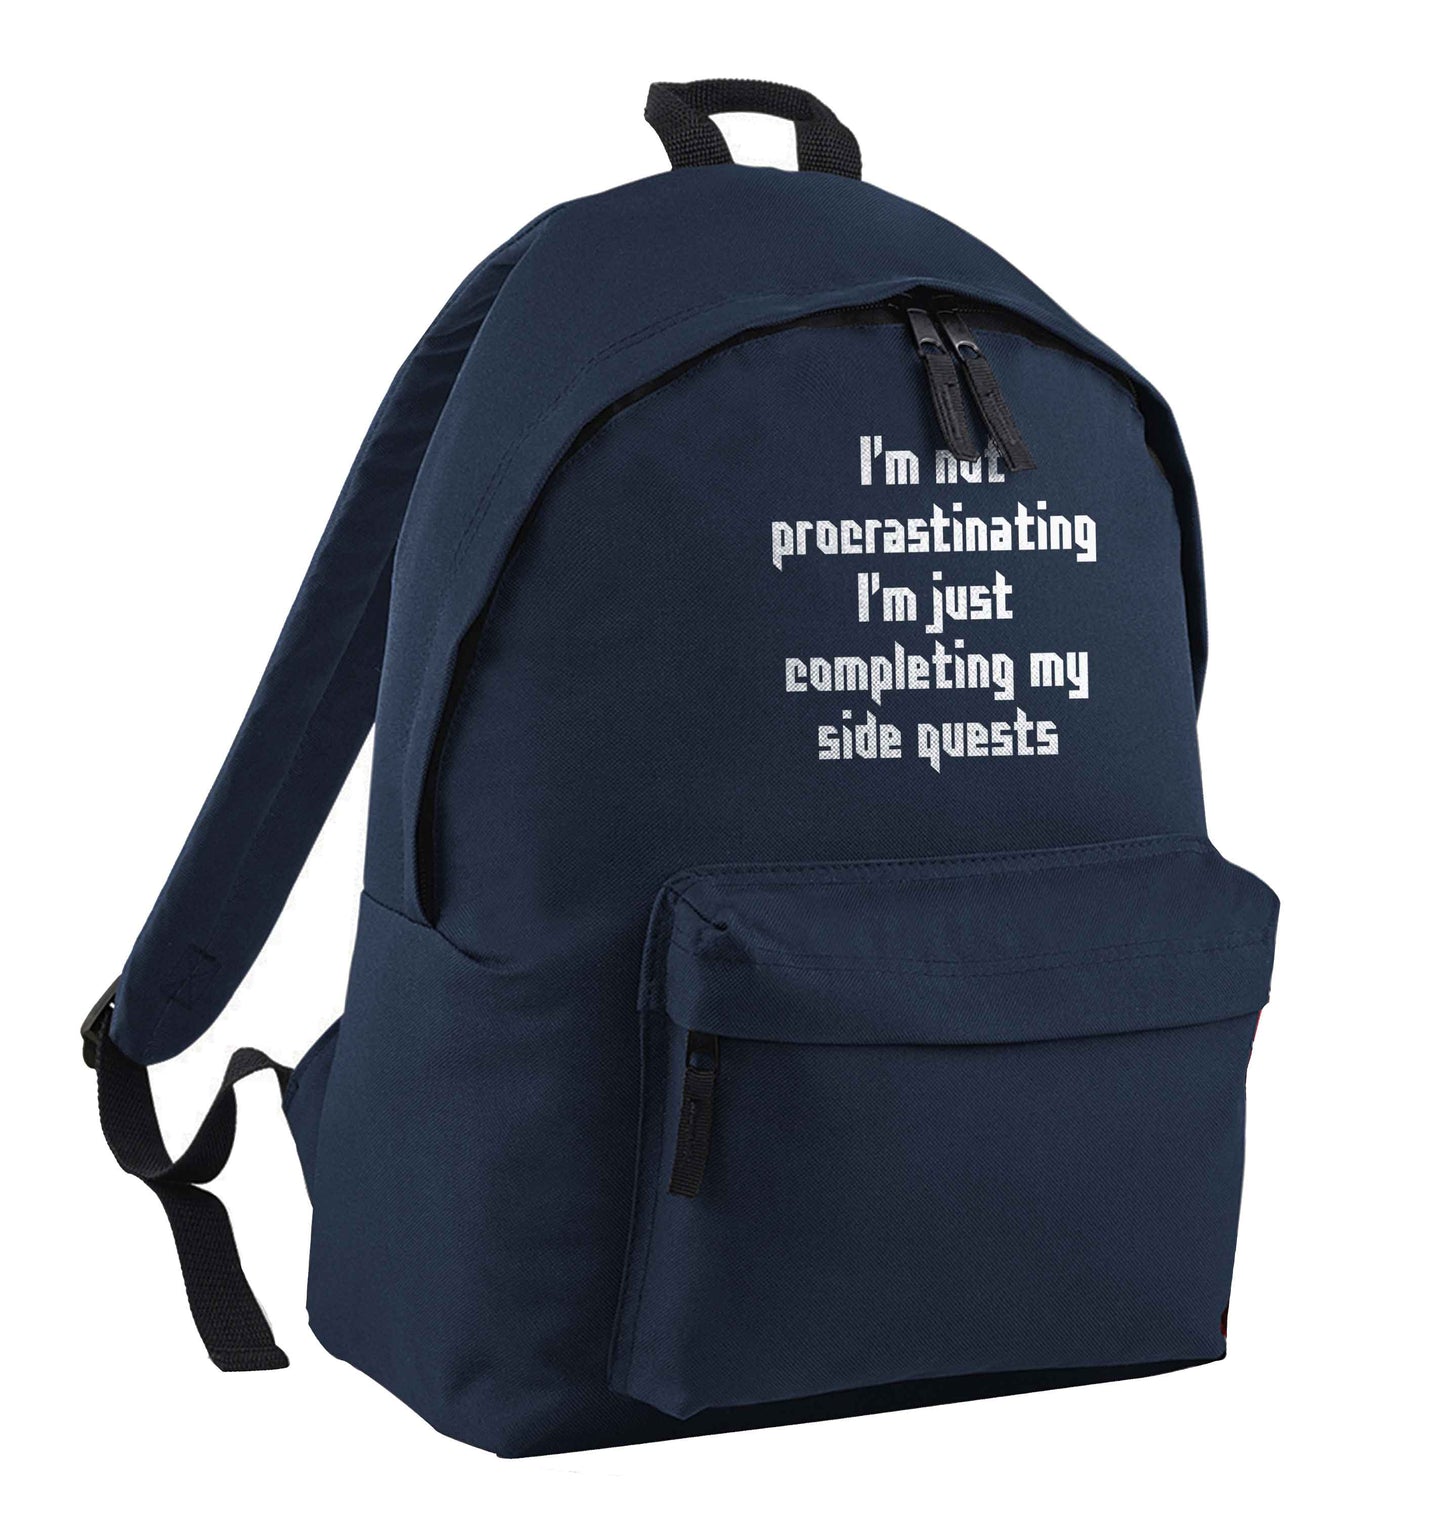 I'm not procrastinating I'm just completing my side quests navy adults backpack